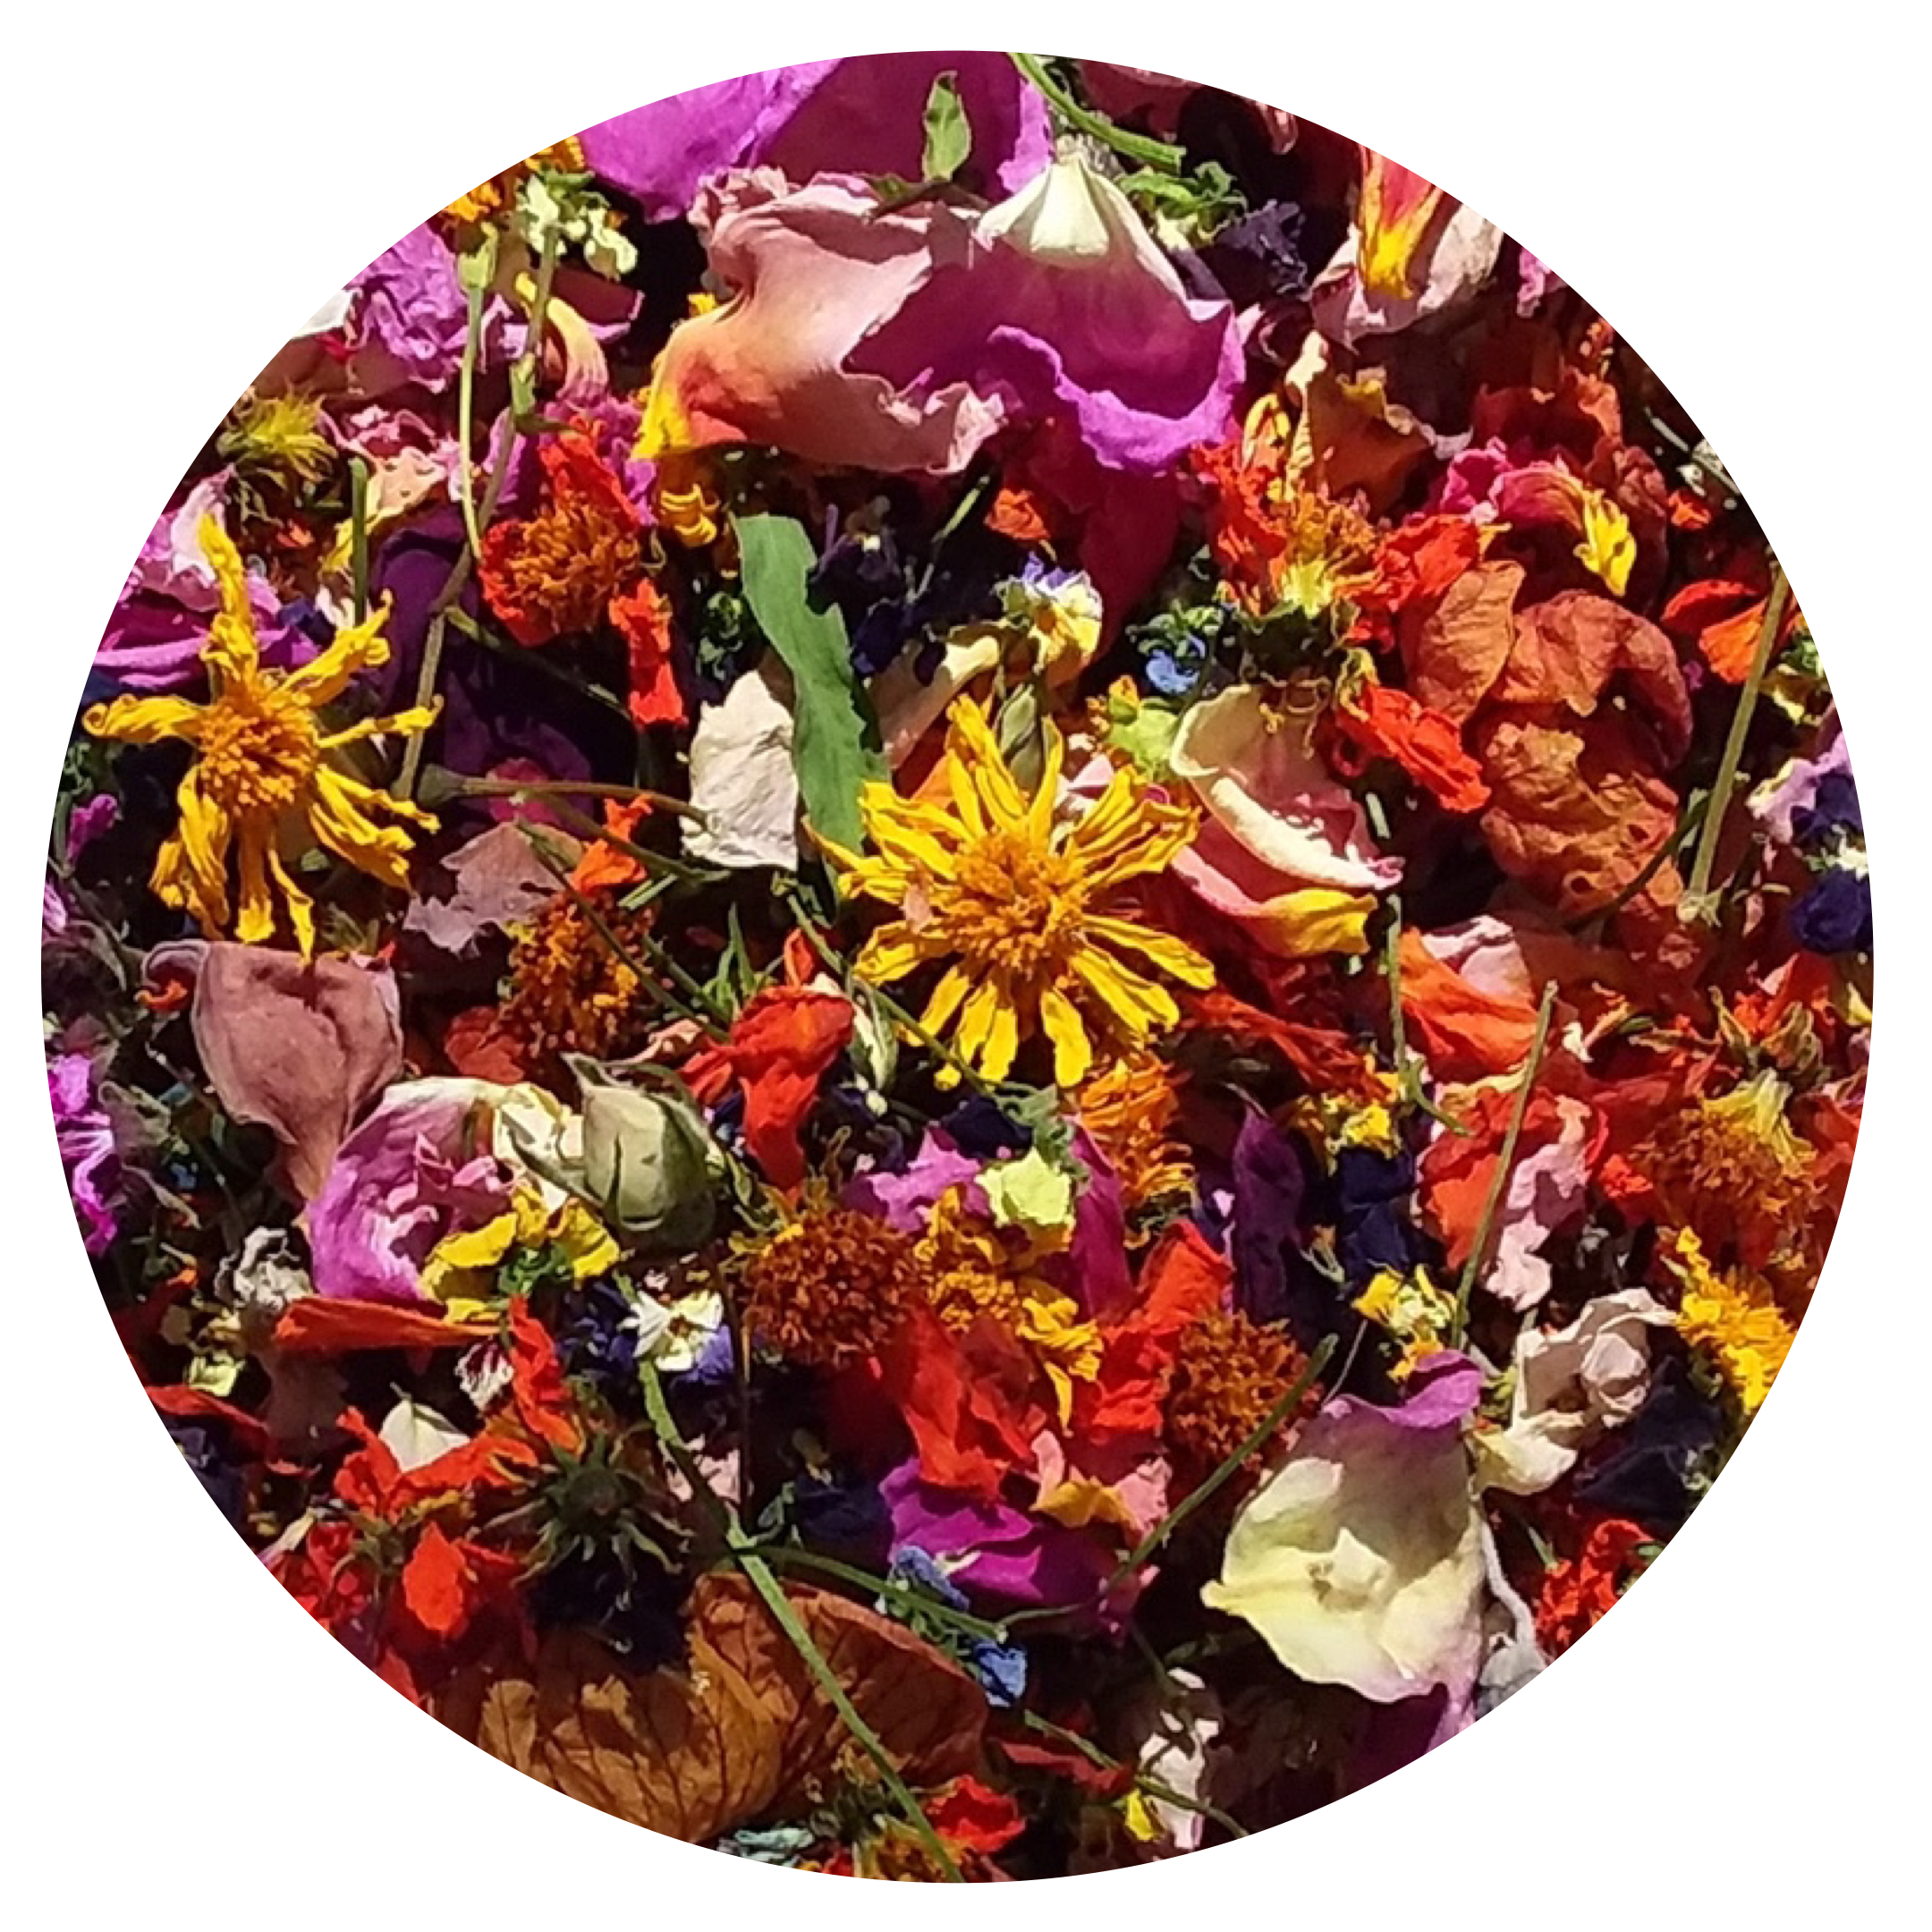 Mix of edible dried flowers for baking 18 g